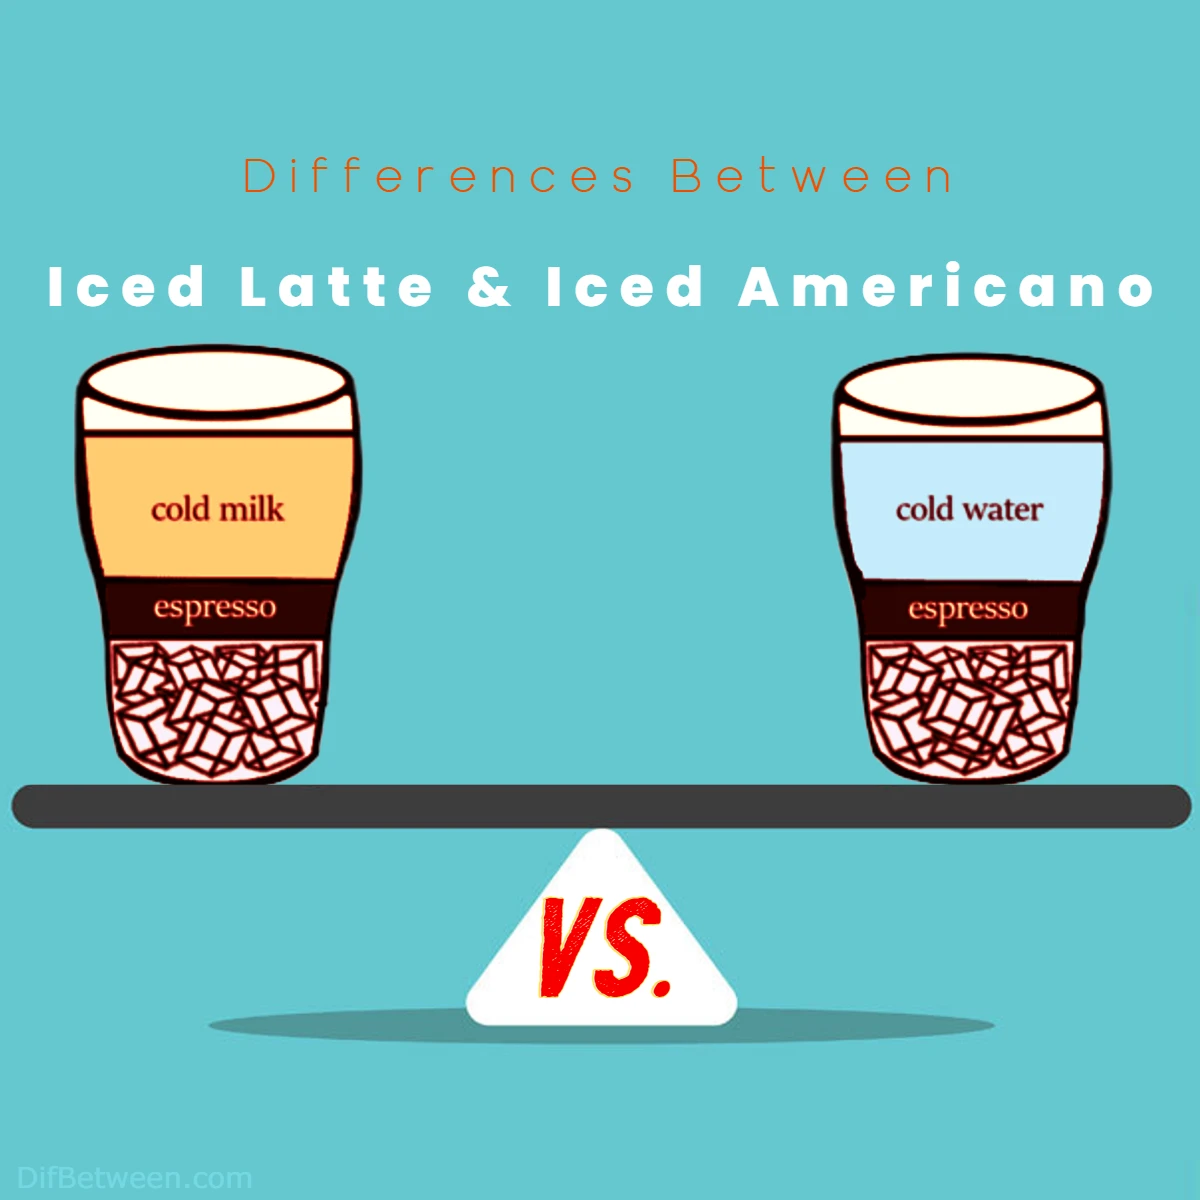 Differences Between Iced Americano and Iced Latte